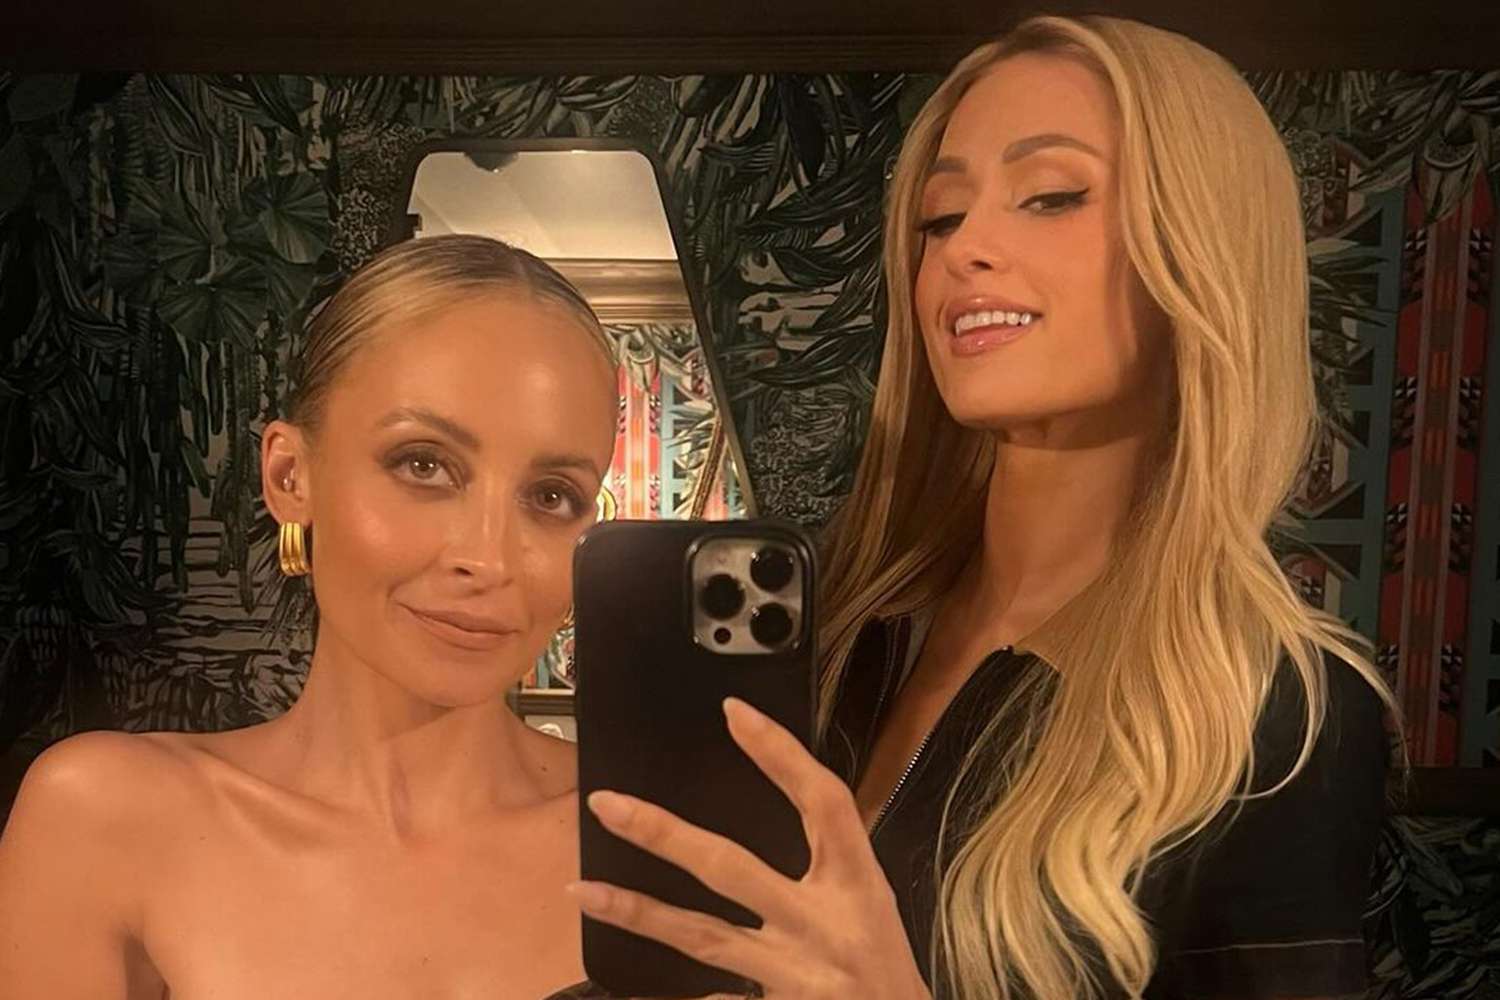 Paris Hilton and Nicole Richie Share ‘Simple Life’ Selfie: ‘Ready for Another Iconic Adventure’